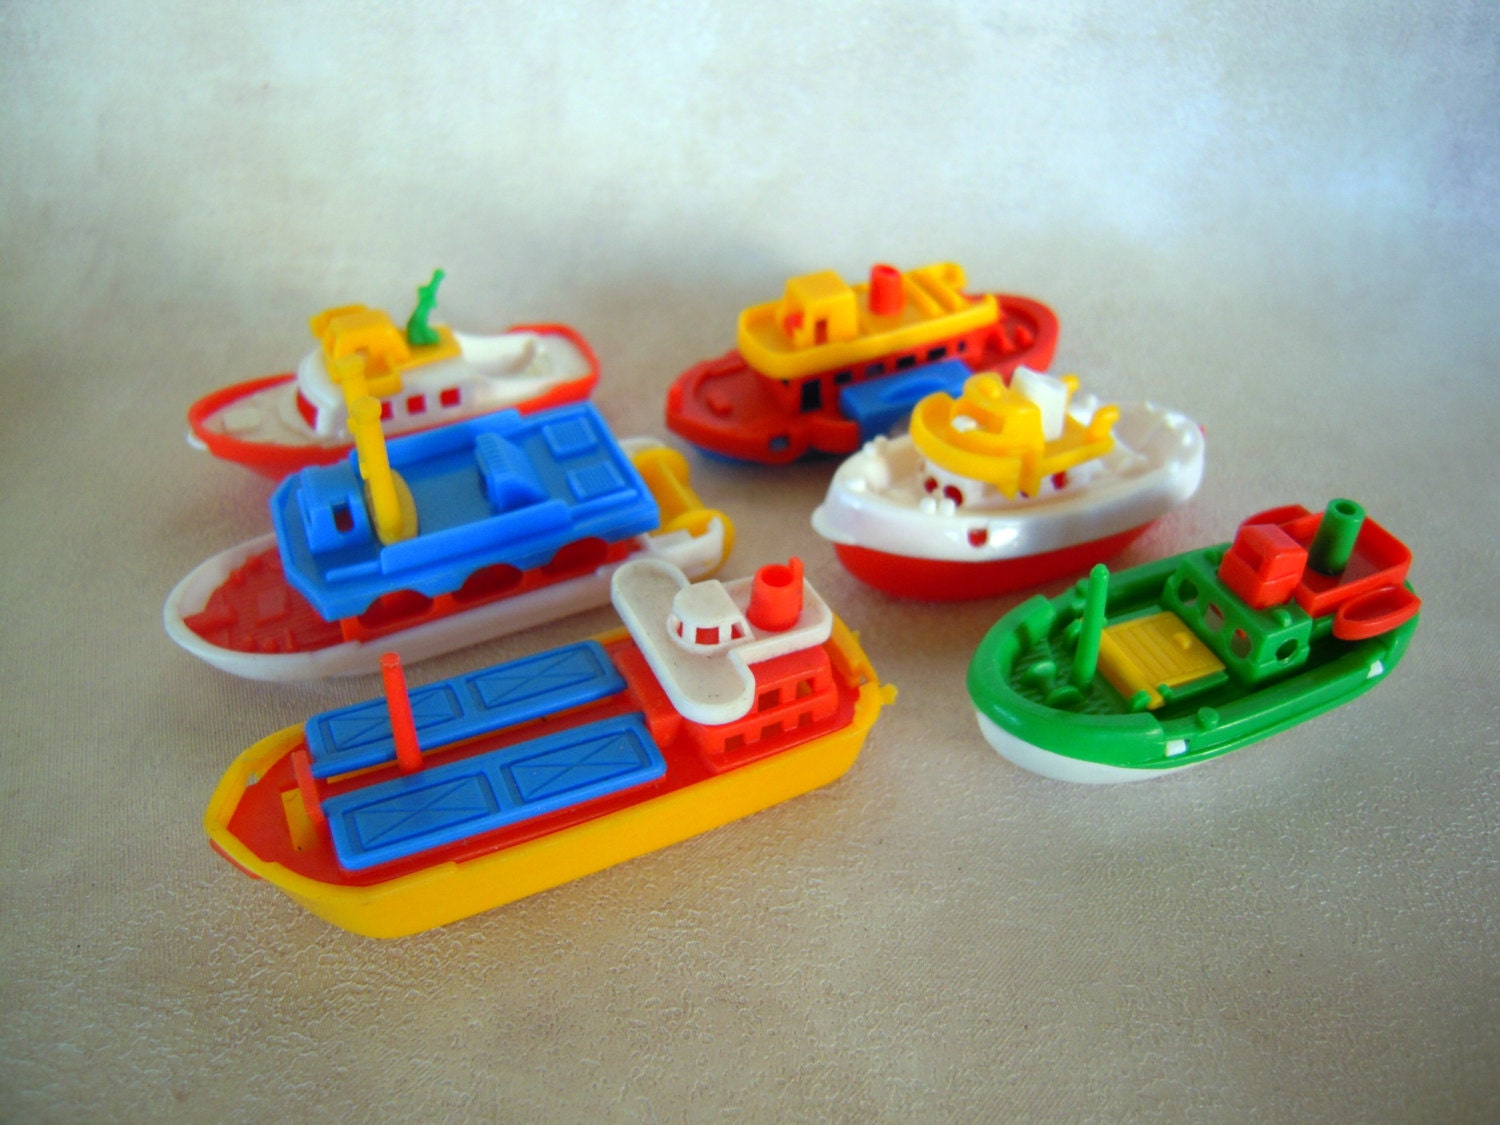 Vintage Plastic Toy Boat Set Made in W. Germany by 2bcre8iv